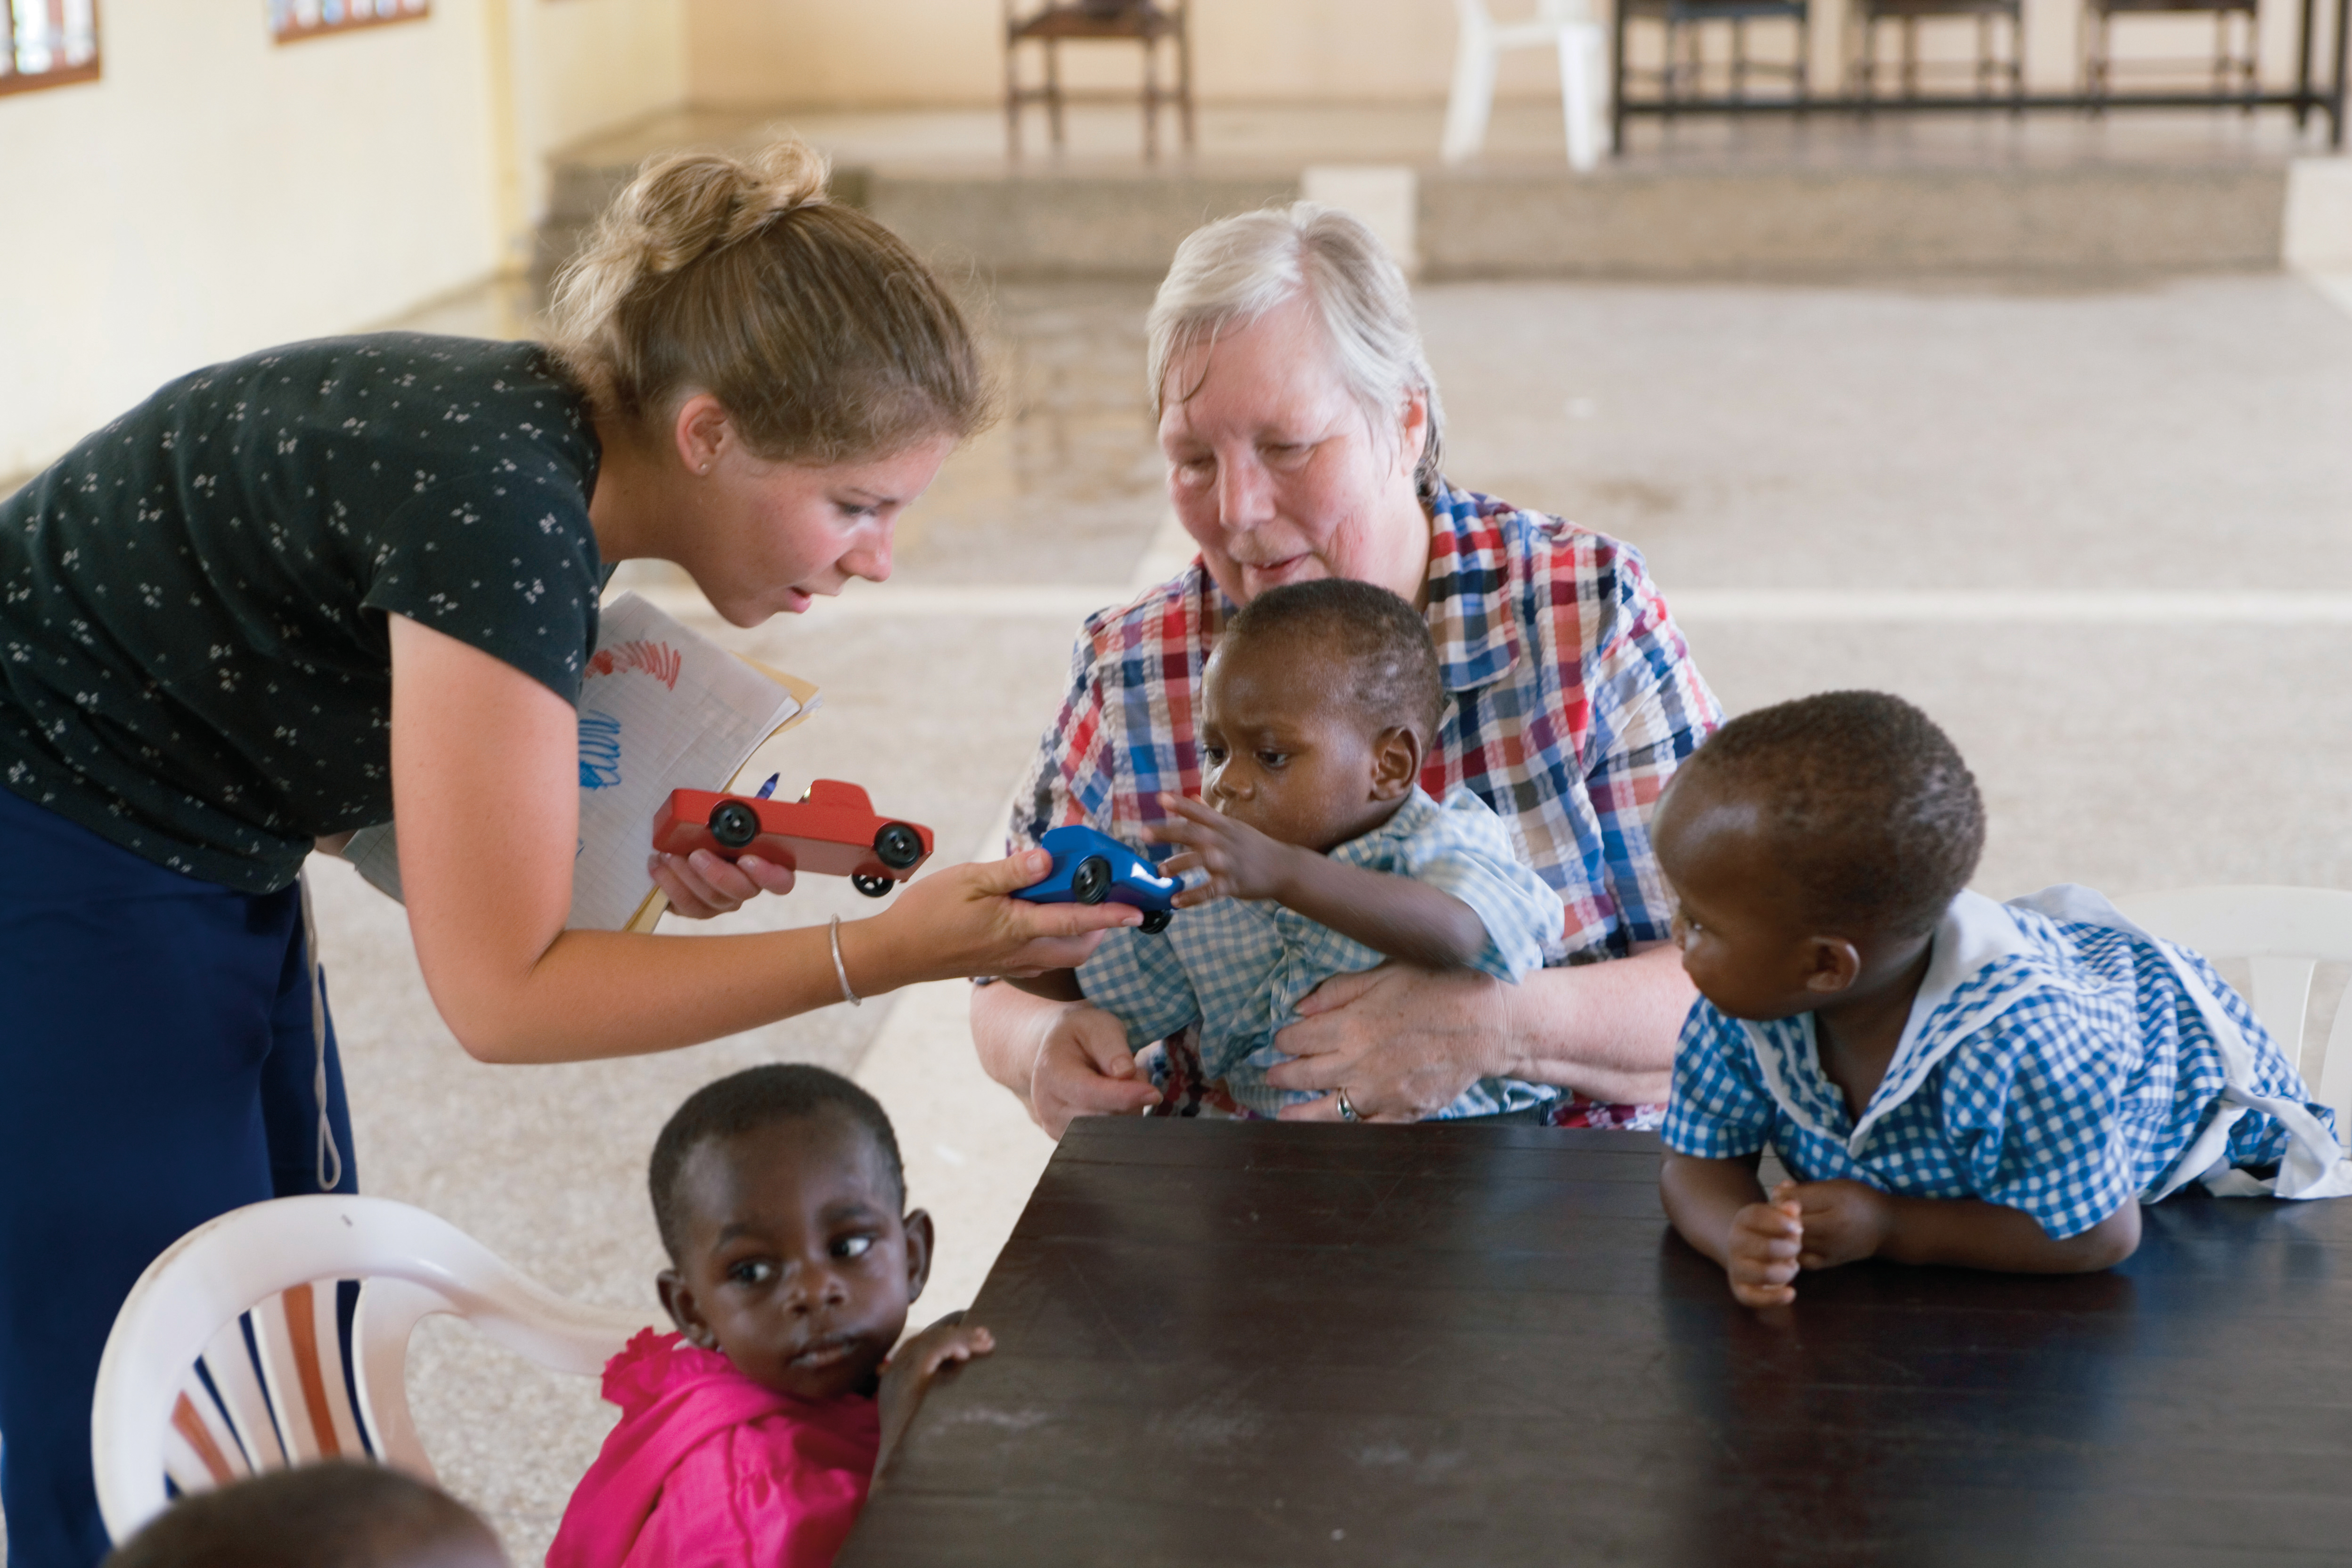 A woman in an orphanage holds an African child while another woman hands the child a wooden car, with two other children nearby.